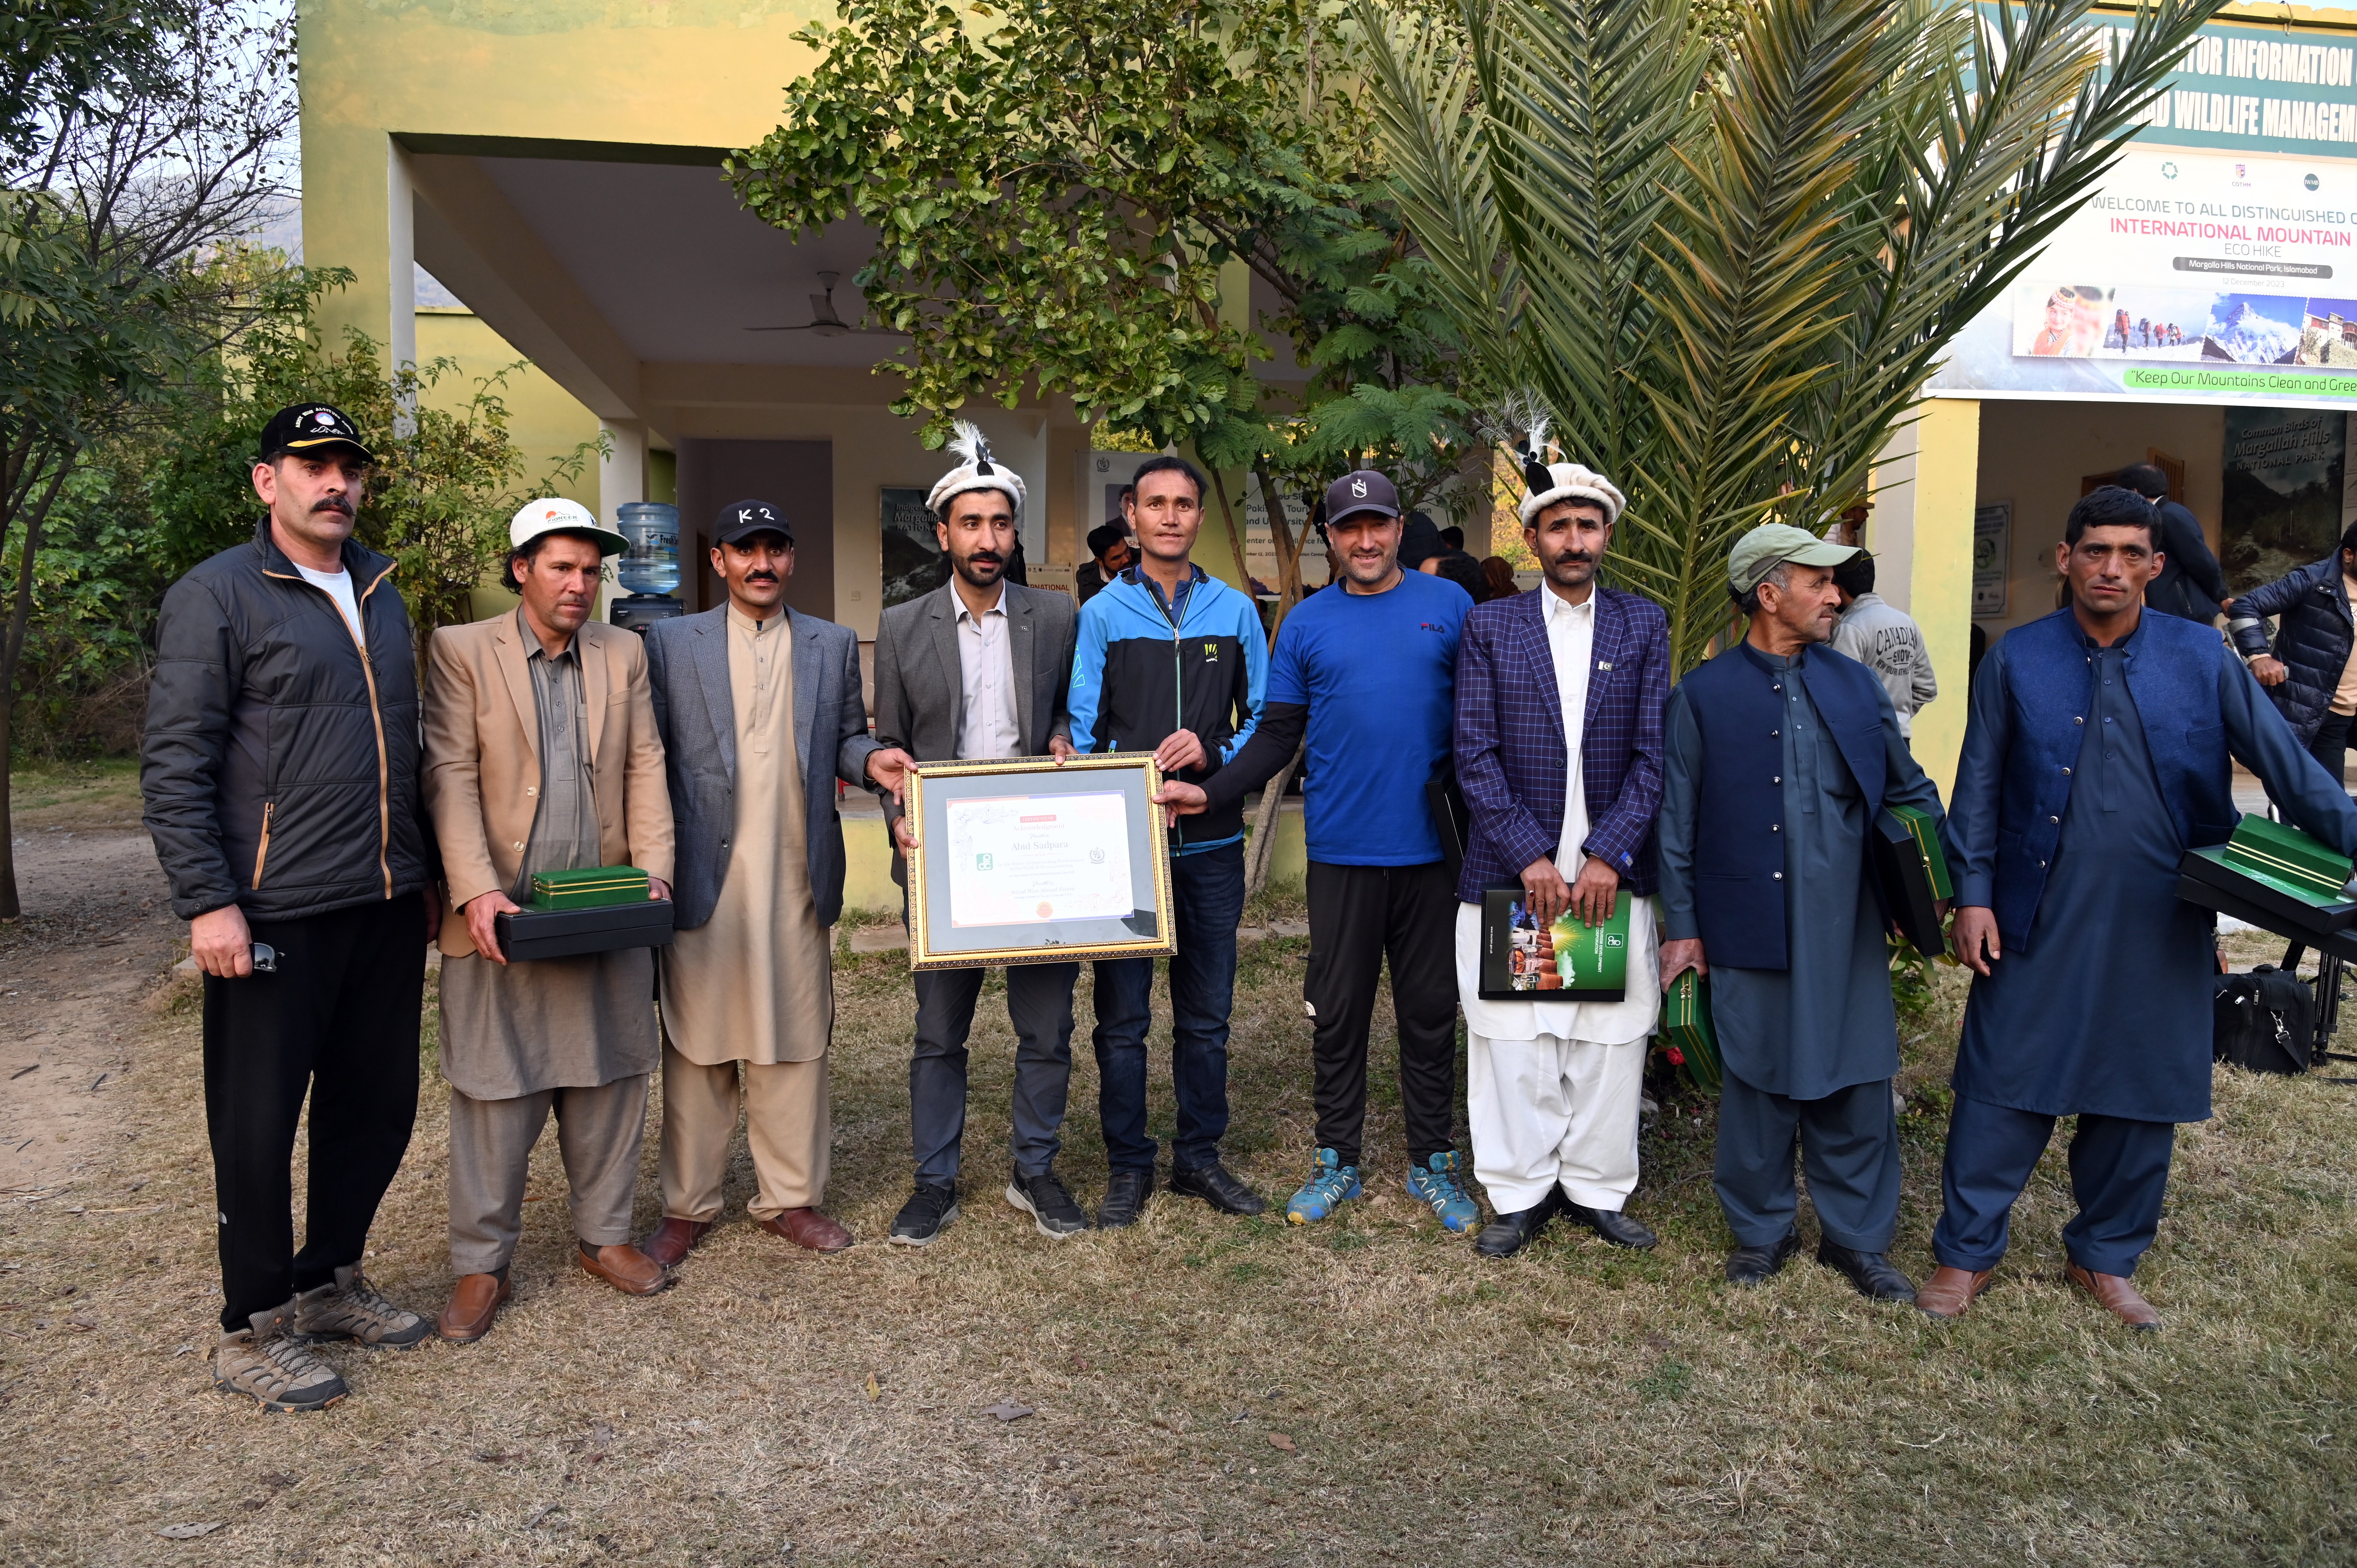 The group photo of the speakers and the participants at the award distribution ceremony on  International Mountain Day at Trail-6